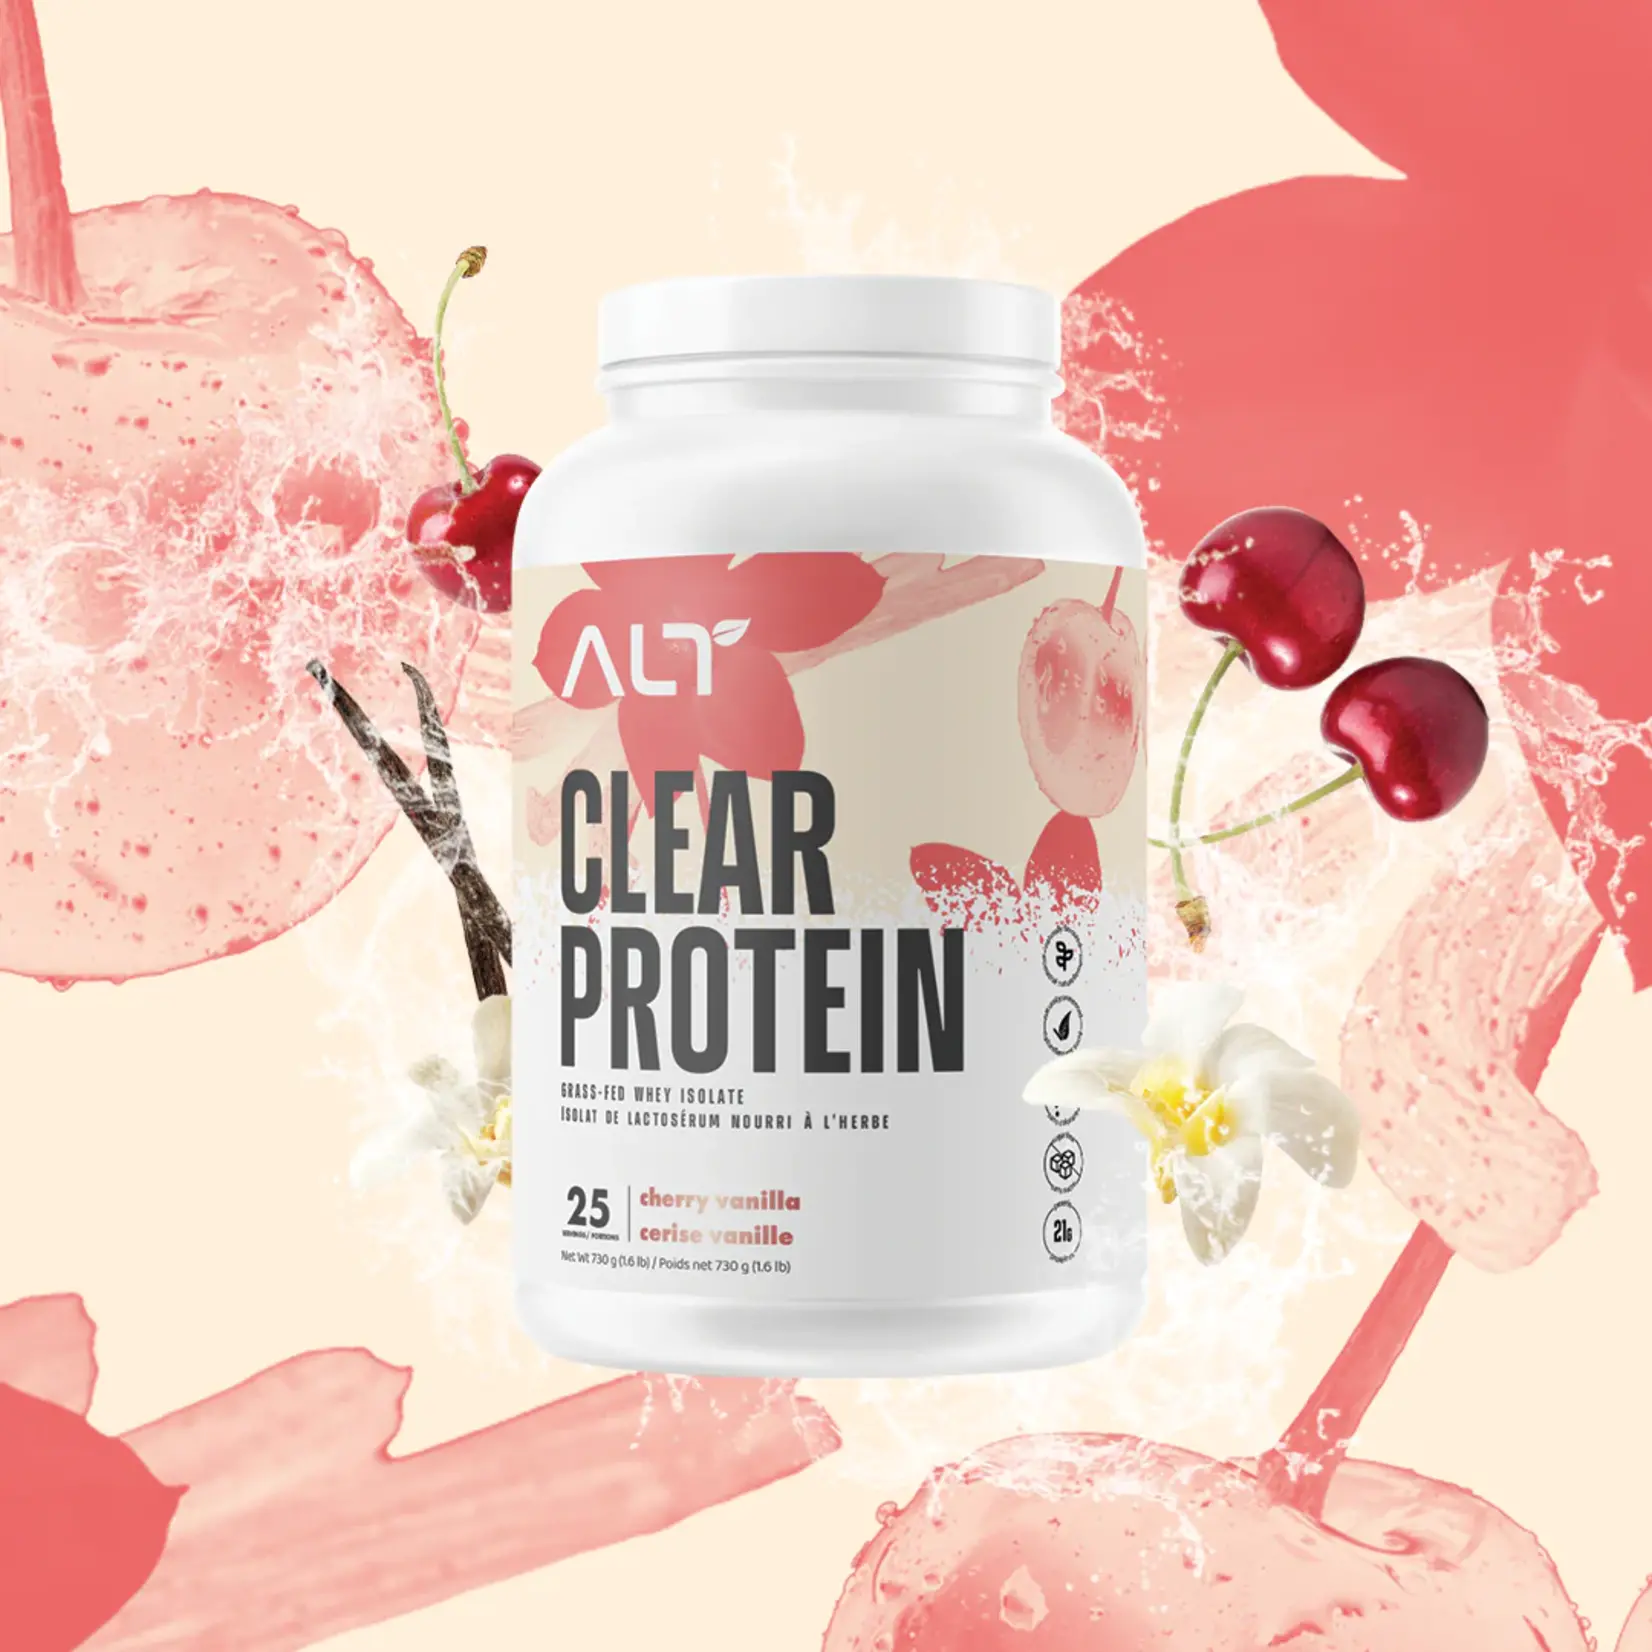 ALT Clear Protein